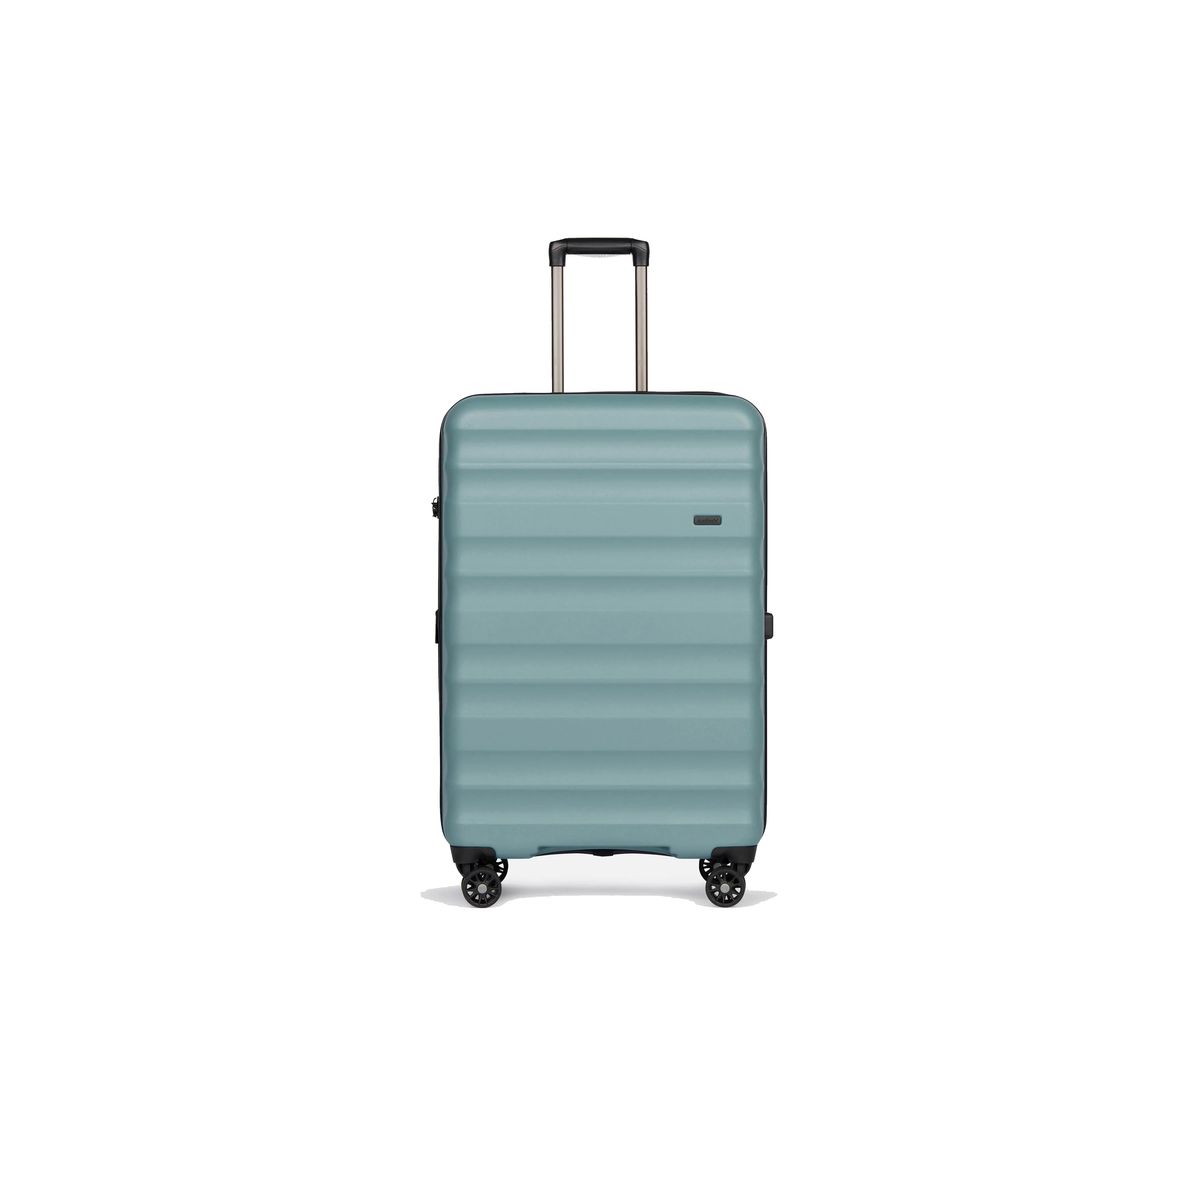 The best large suitcases for your checked luggage needs